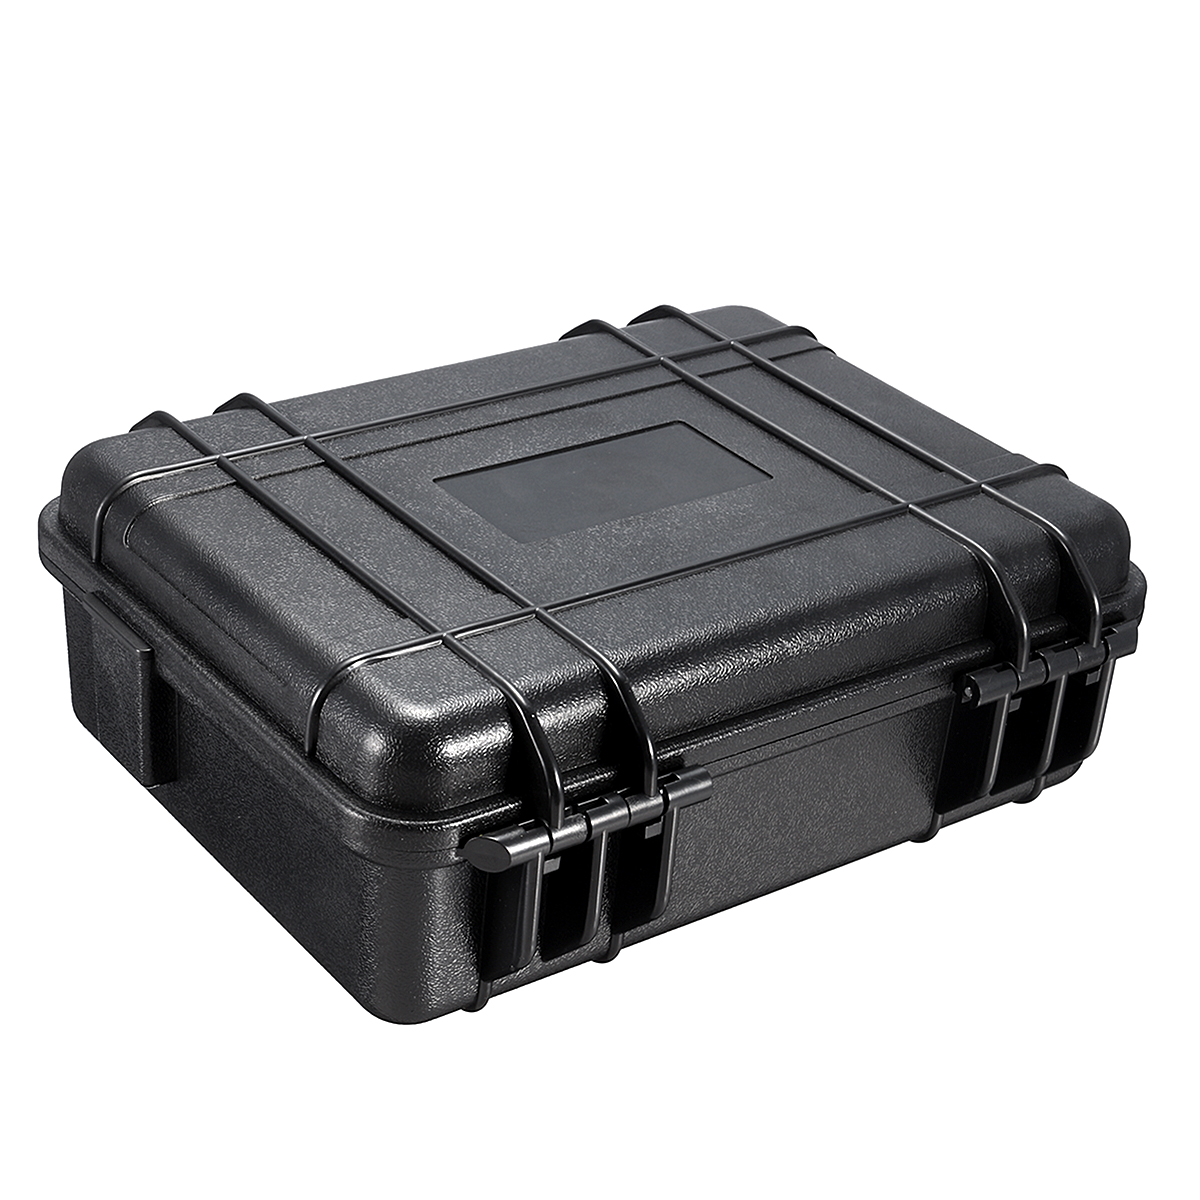 275x210x90mm-Waterproof-Hard-Carry-Camera-Lens-Photography-Tool-Case-Bag-Storage-Box-with-Sponge-1351344